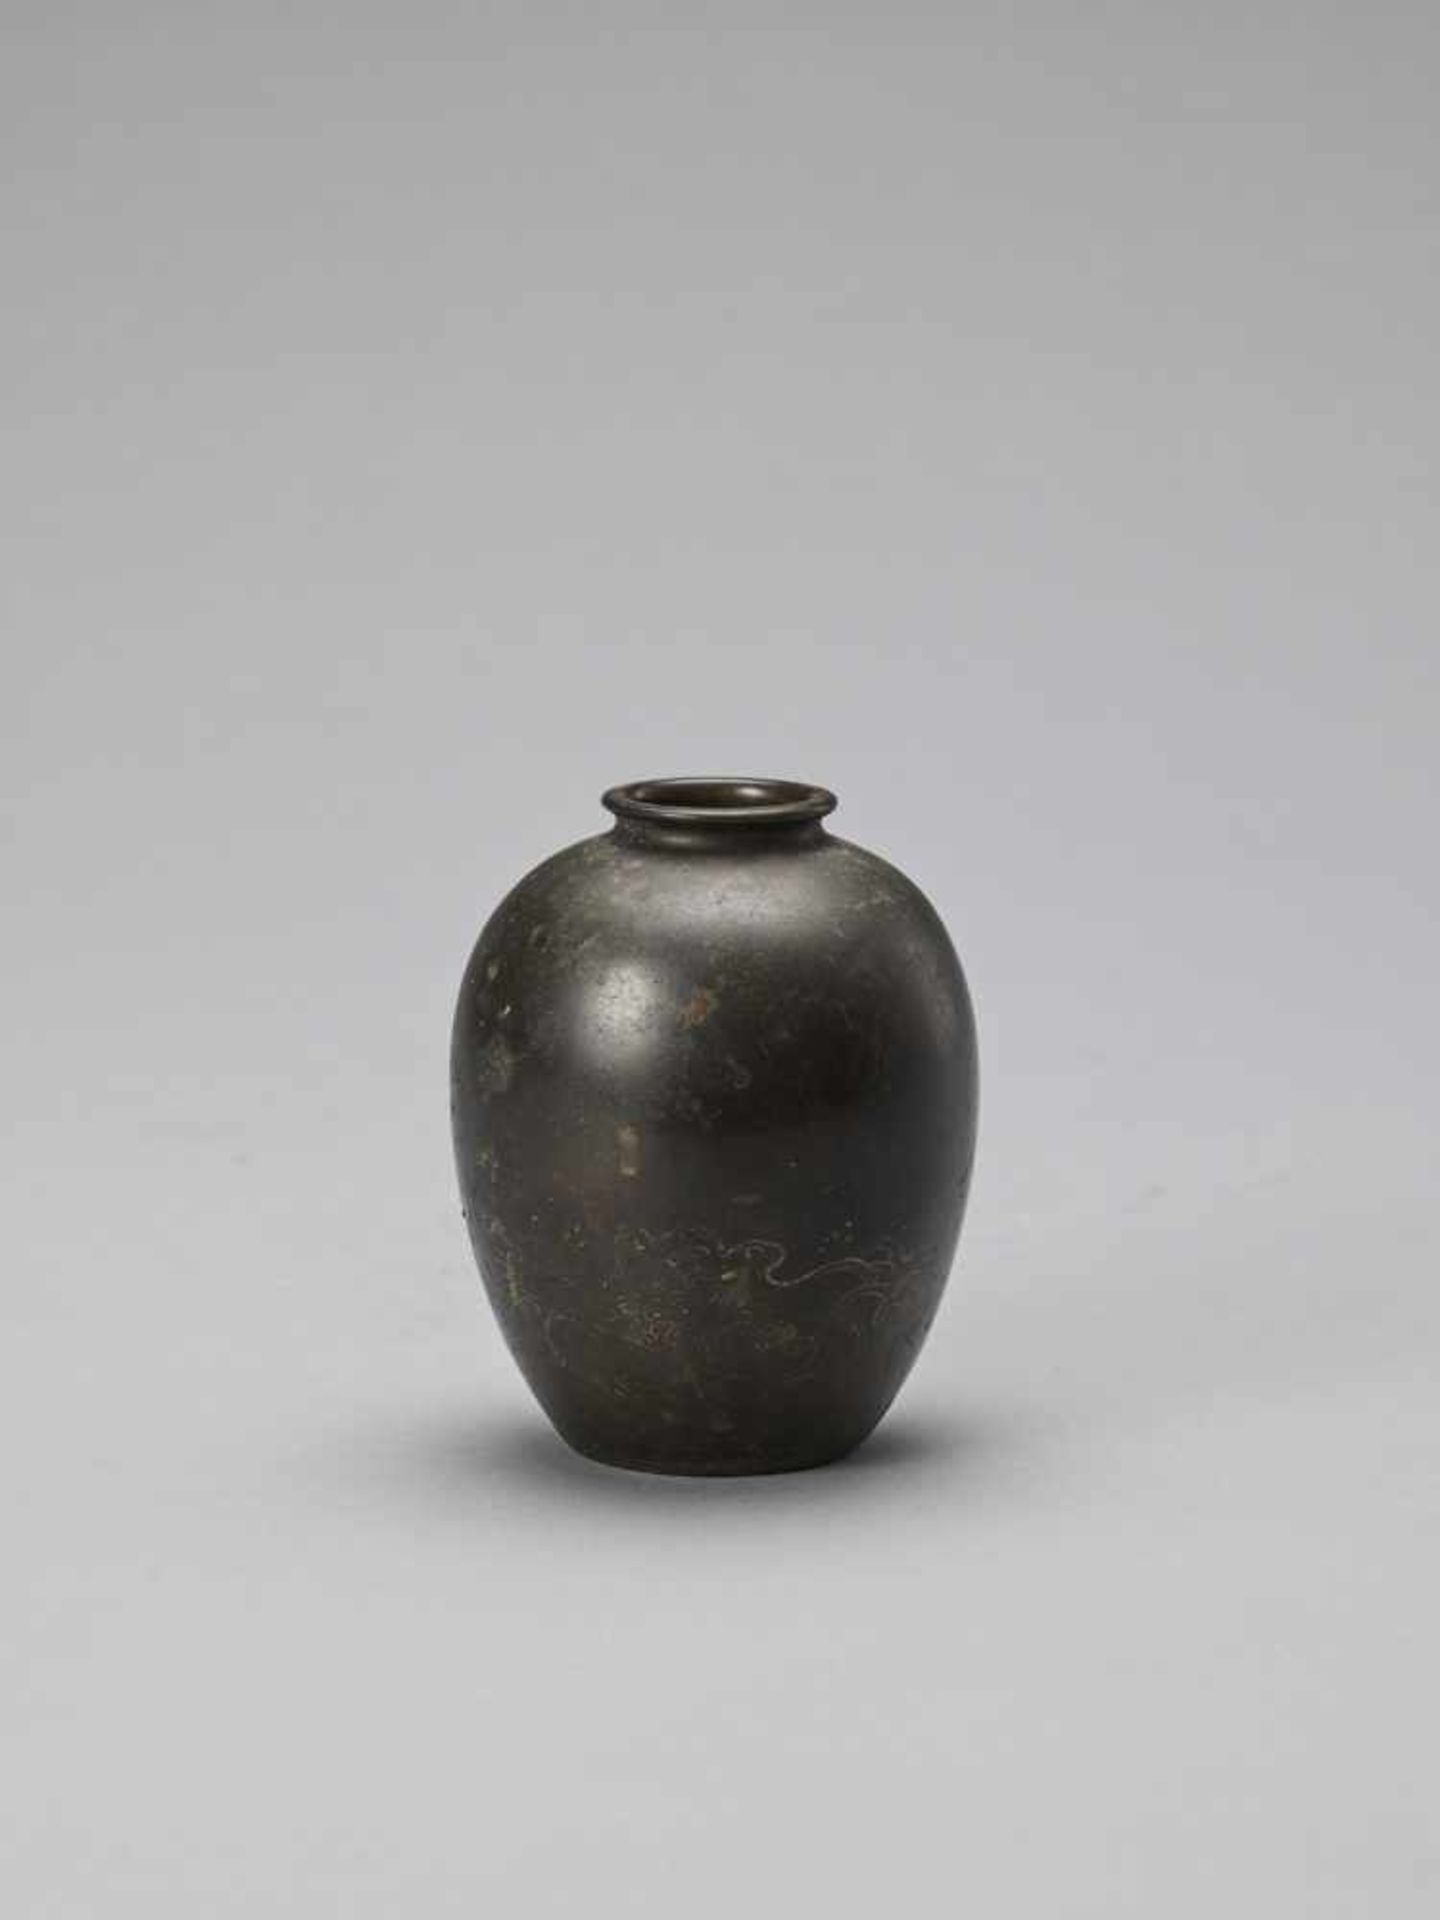 A SMALL SILVER INLAID BRONZE VASE - Image 4 of 7